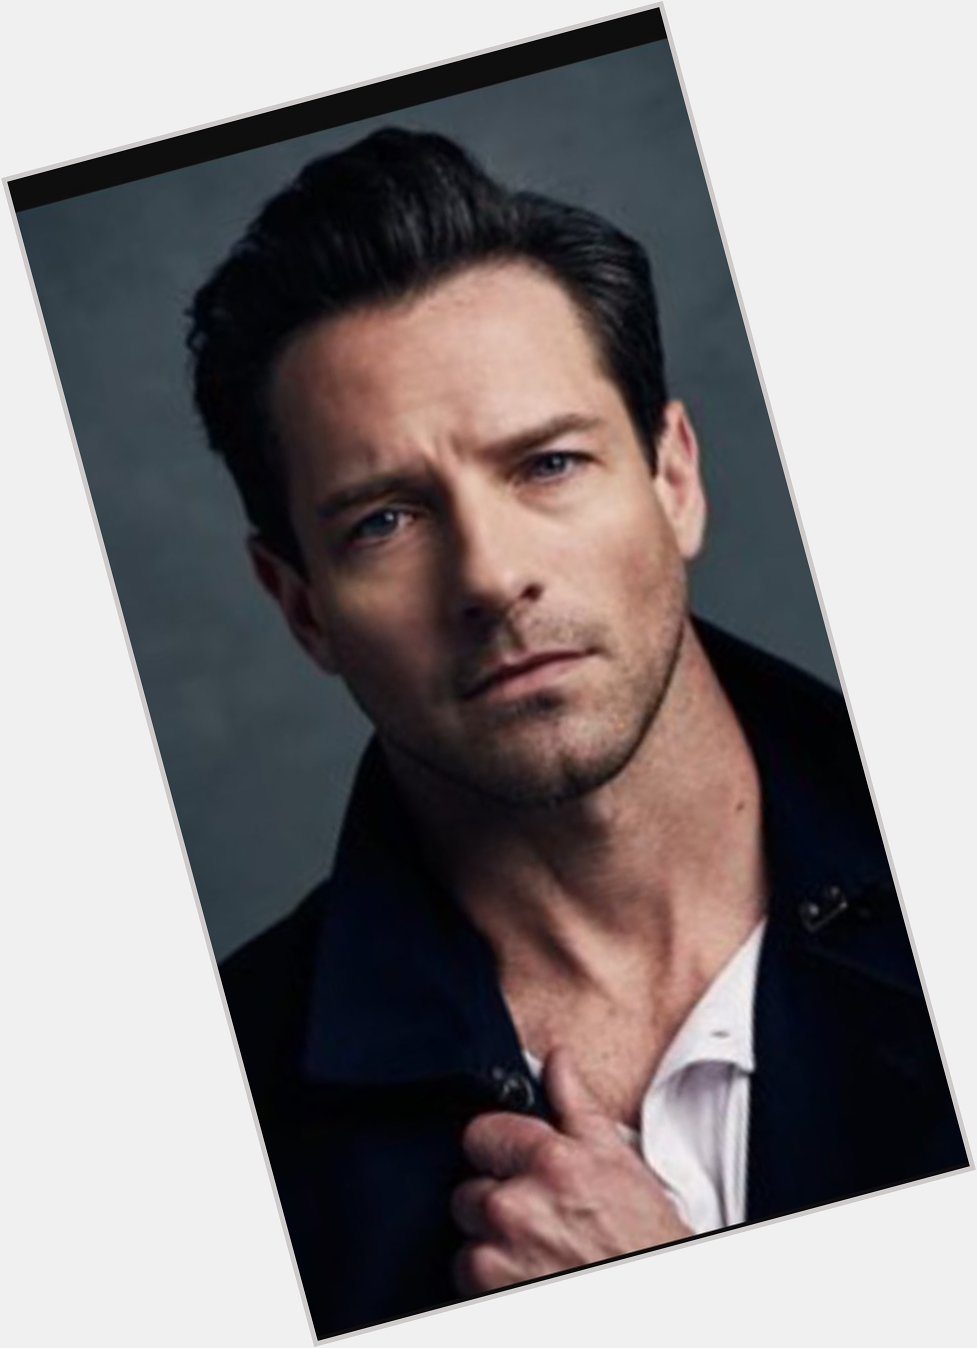 Happy birthday wishes to this wonderful man Ian Bohen and his wonderful 40 years today   